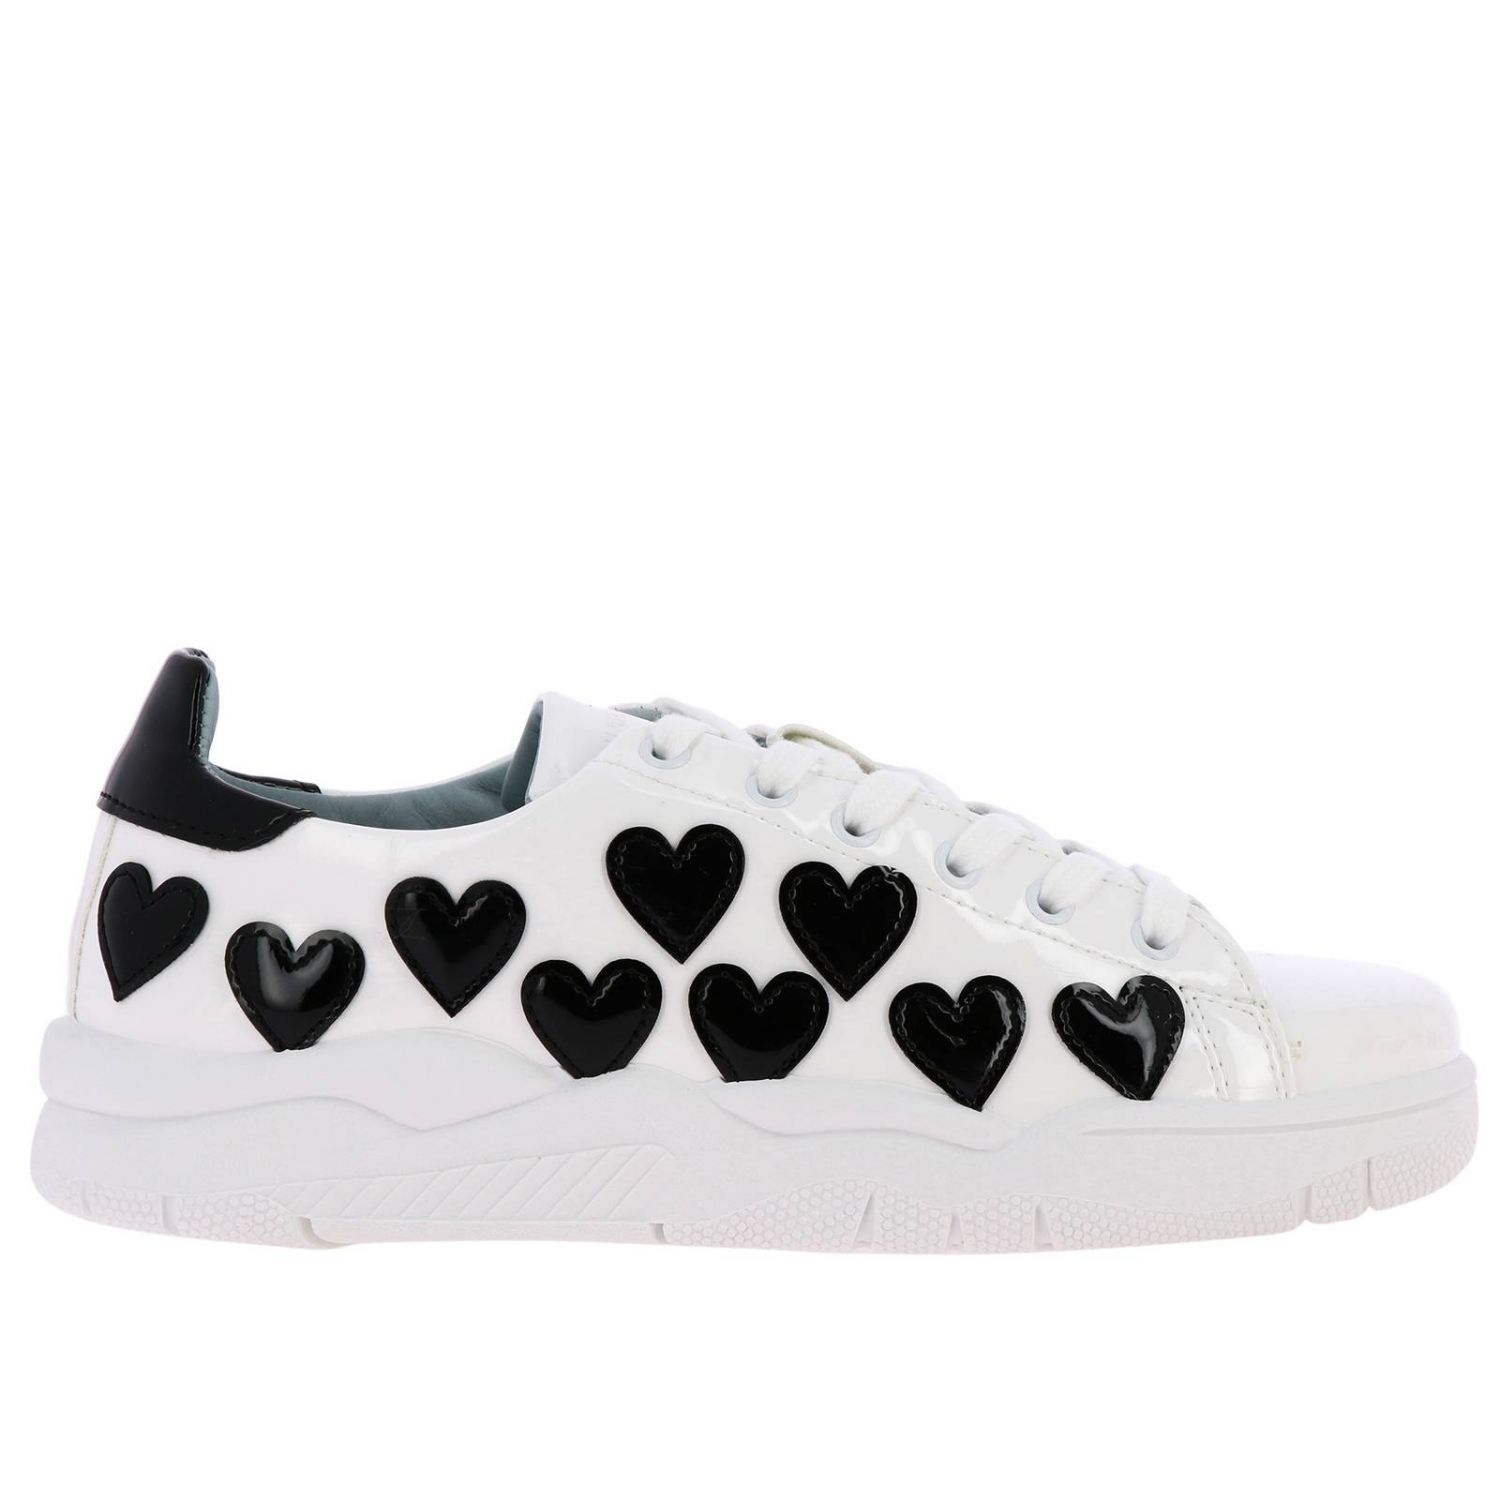 Chiara Ferragni Outlet: Sneakers Roger in patent leather with maxi  contrasting hearts - Black | Chiara Ferragni sneakers CF2523 online on  